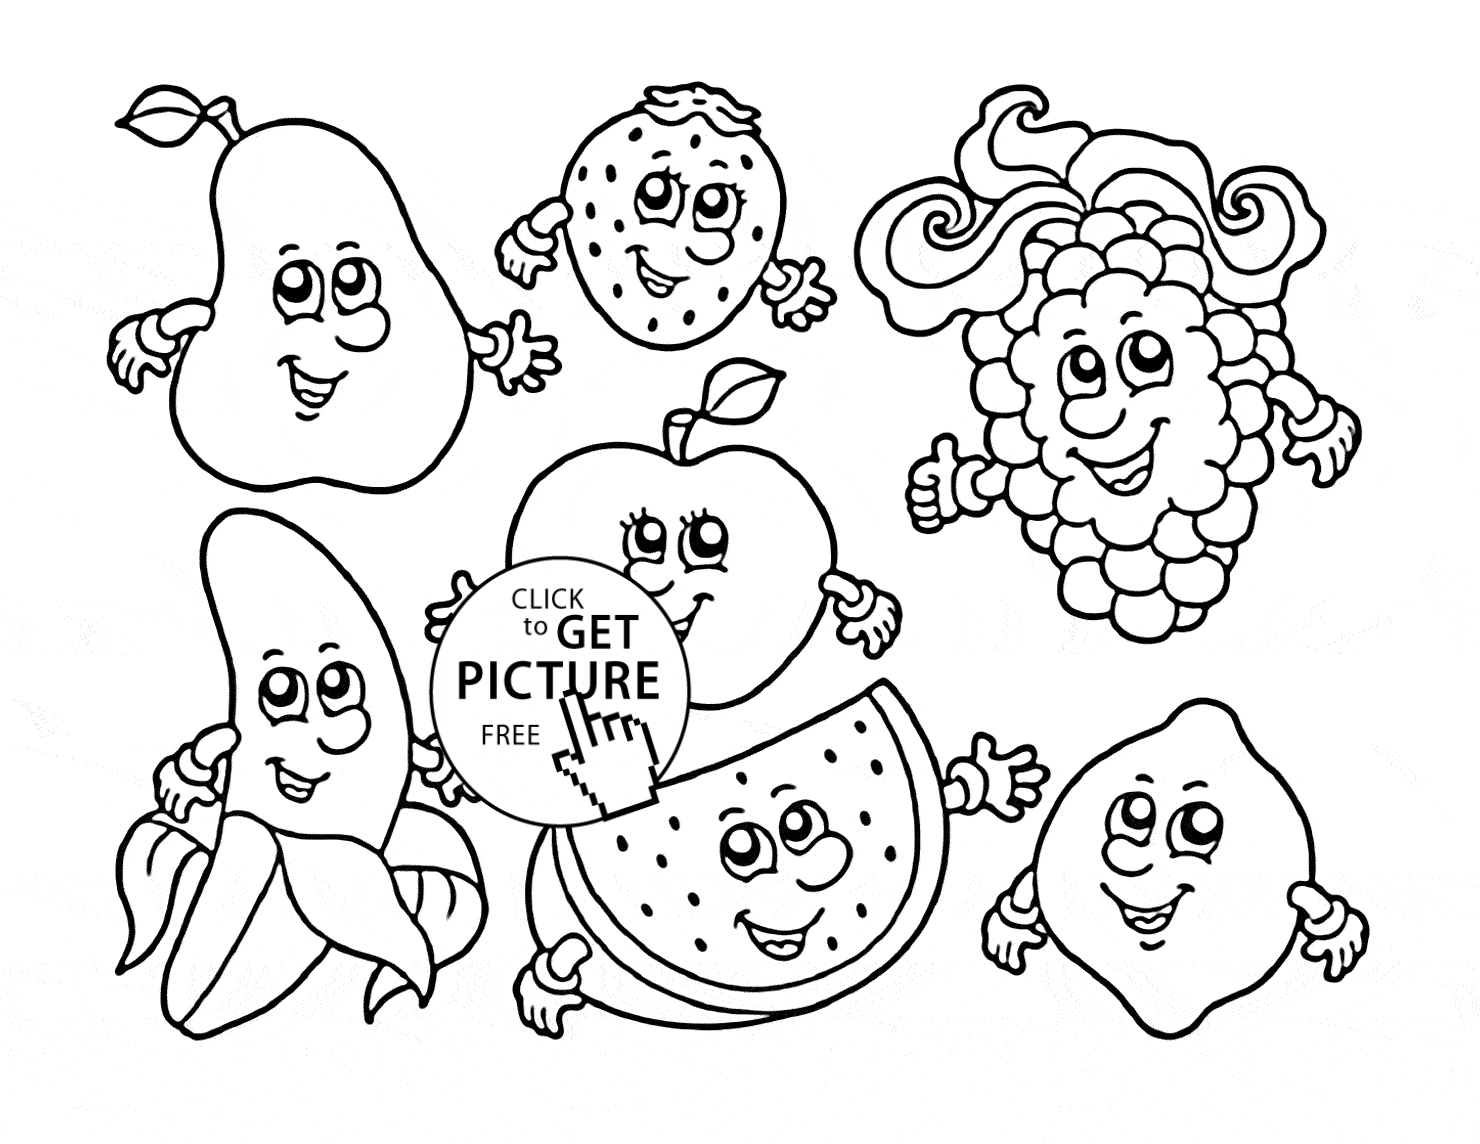 picture of fruits for colouring cartoon fruits coloring page for kids fruits coloring picture of for fruits colouring 